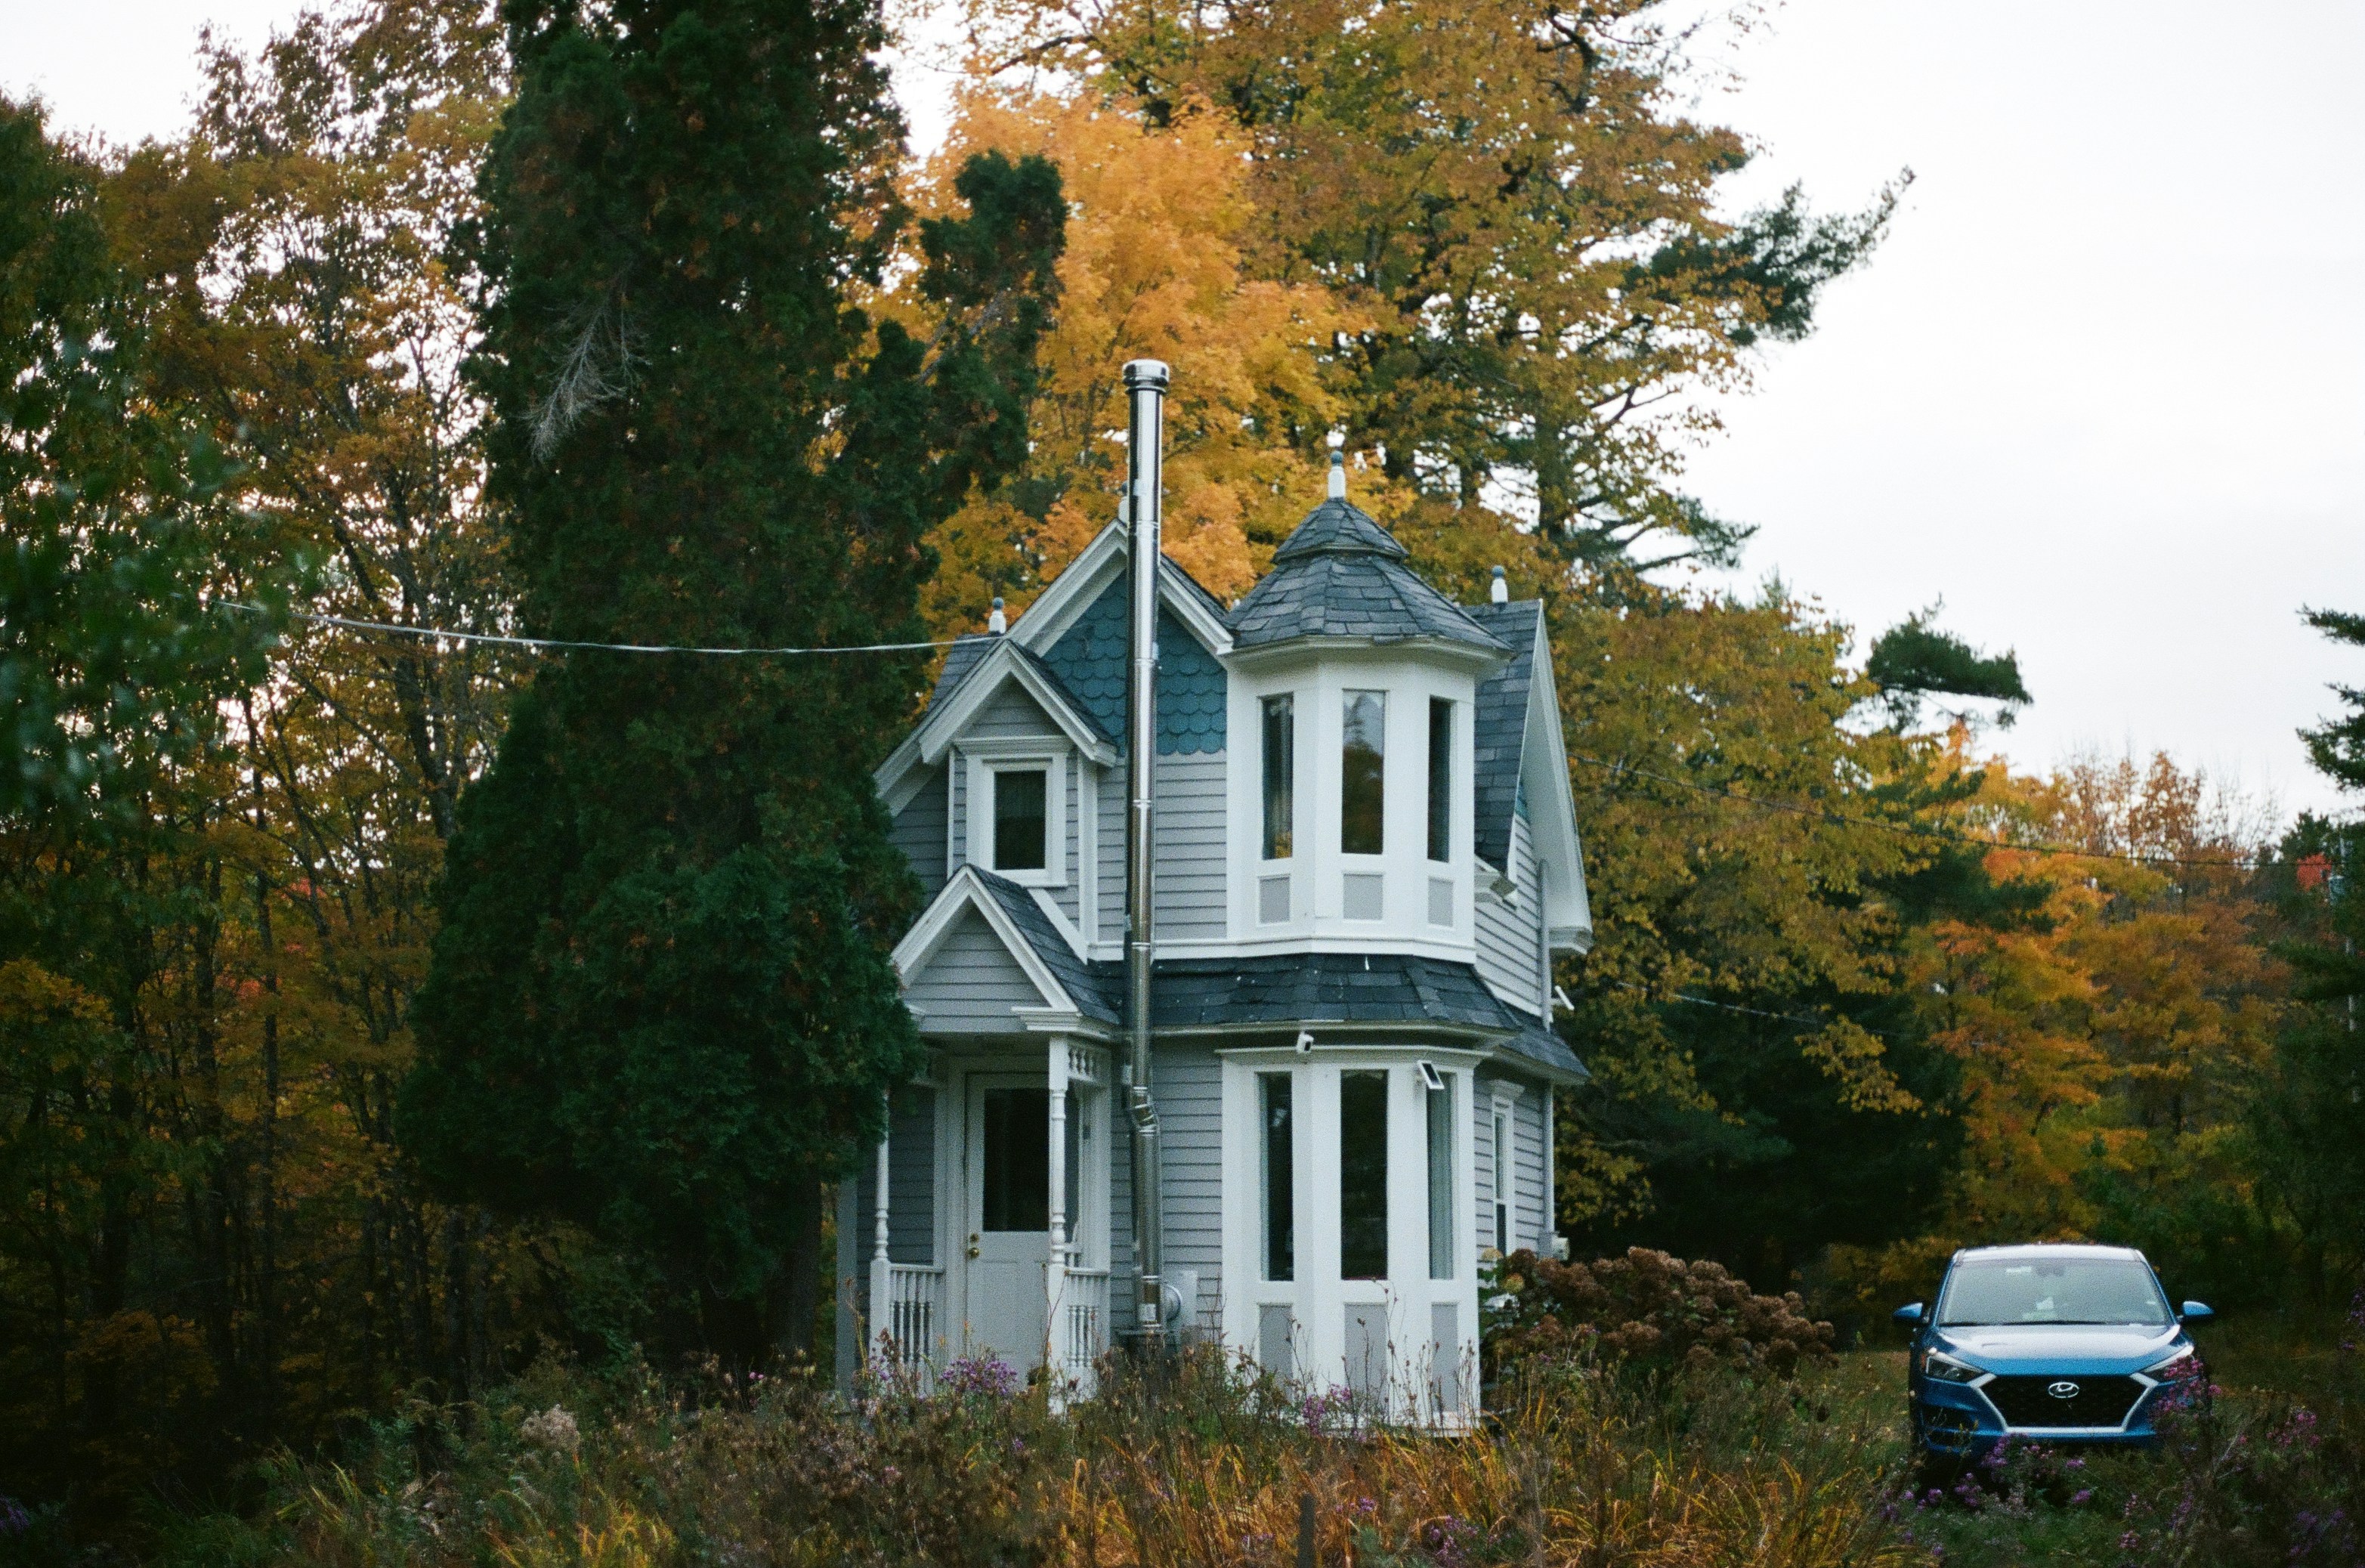 A tiny Victorian house in Maine. Shot on 35mm film. Kodak Portra 400